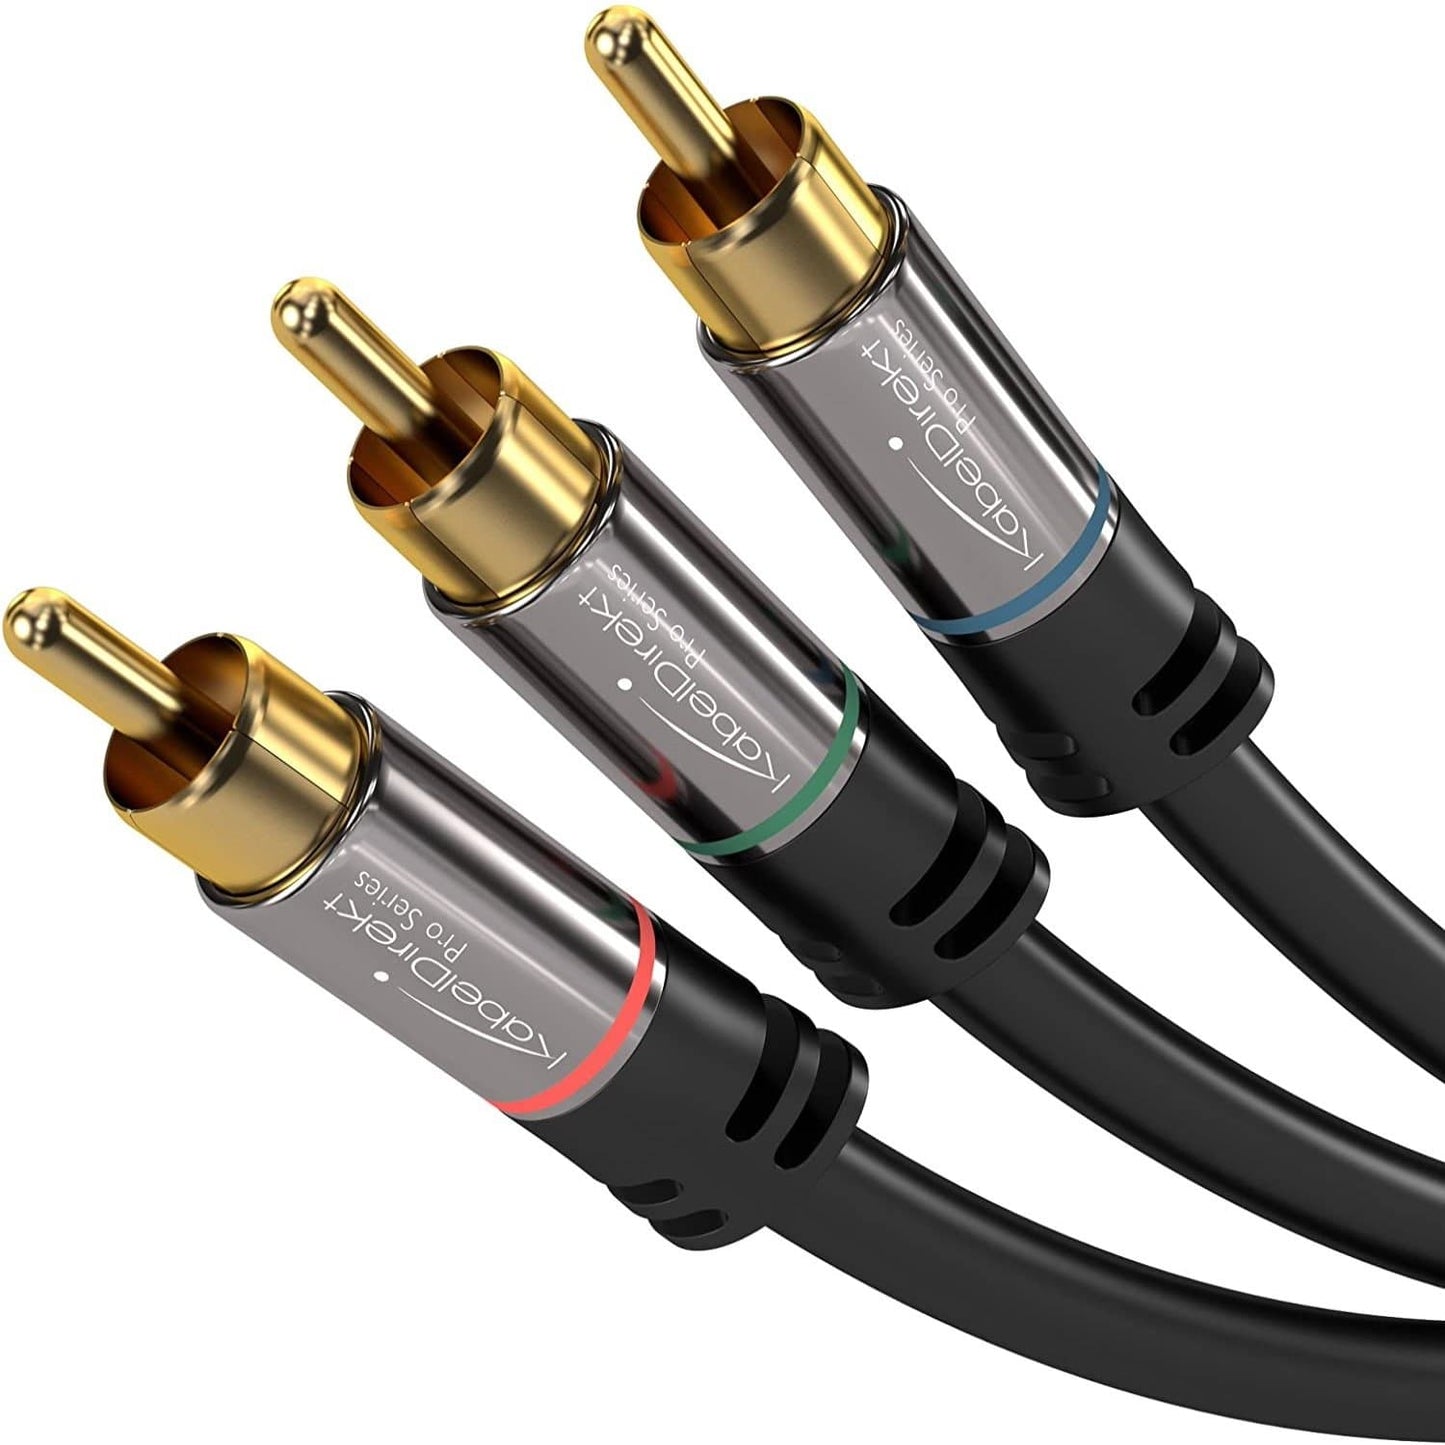 Component Cable - 3X RCA Male to 3x RCA Male FullHD 1080i Video/HDTV